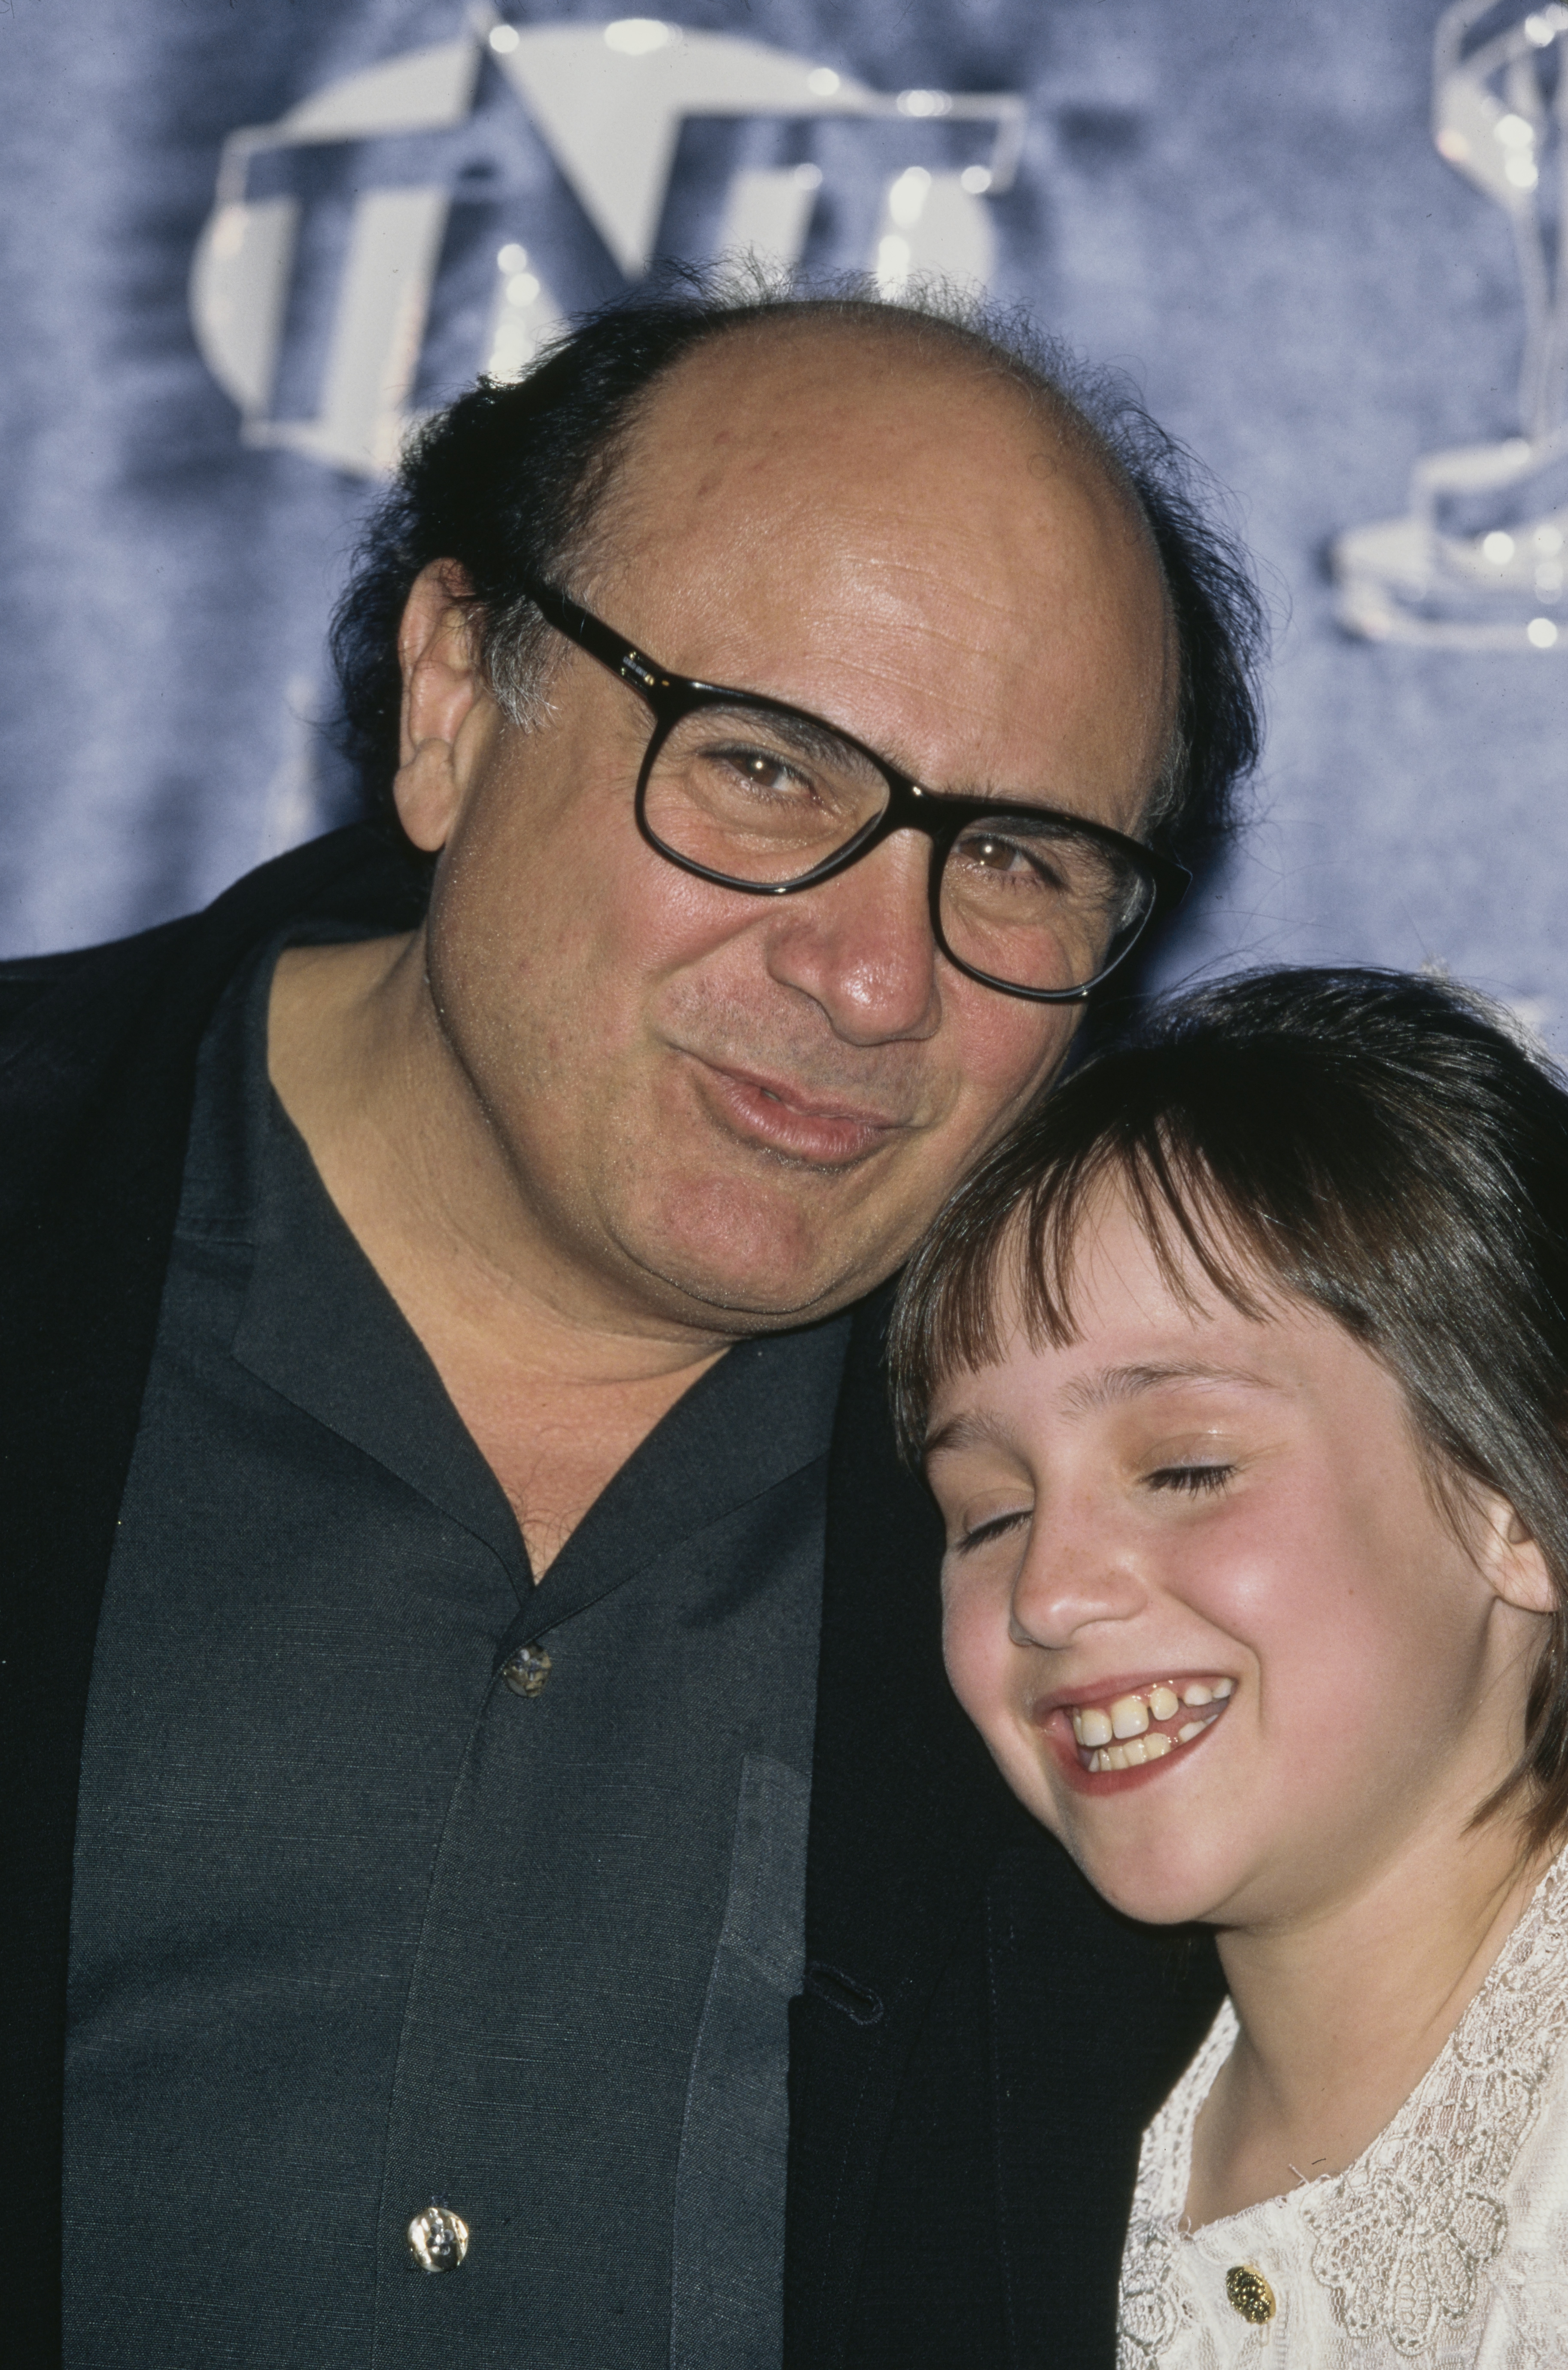 Danny DeVito and Mara Wilson attend and present at the ShoWest Awards, held at the MGM Grand Hotel in Las Vegas, Nevada, March 6, 1997. | Source: Getty Images